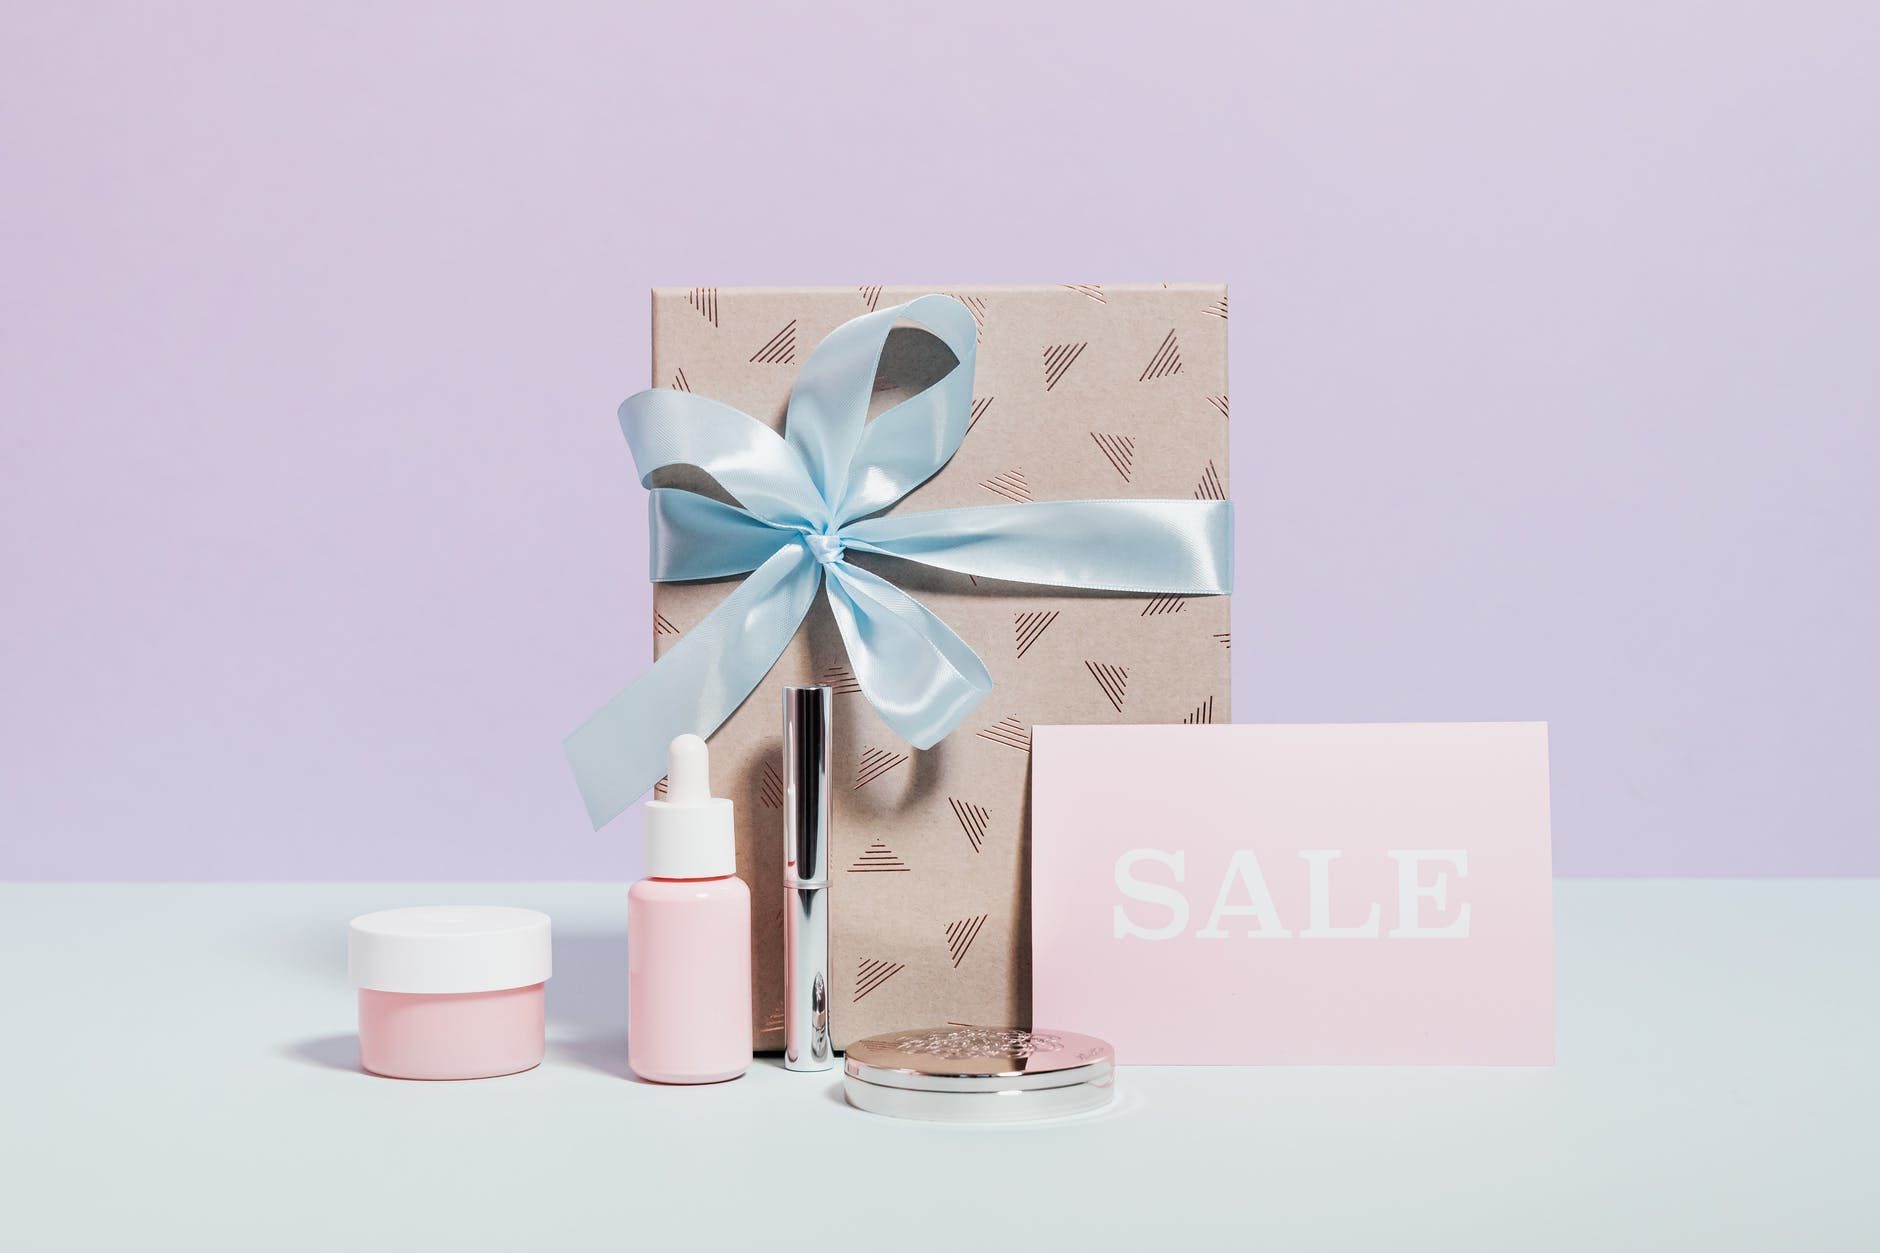 cosmetic products on sale